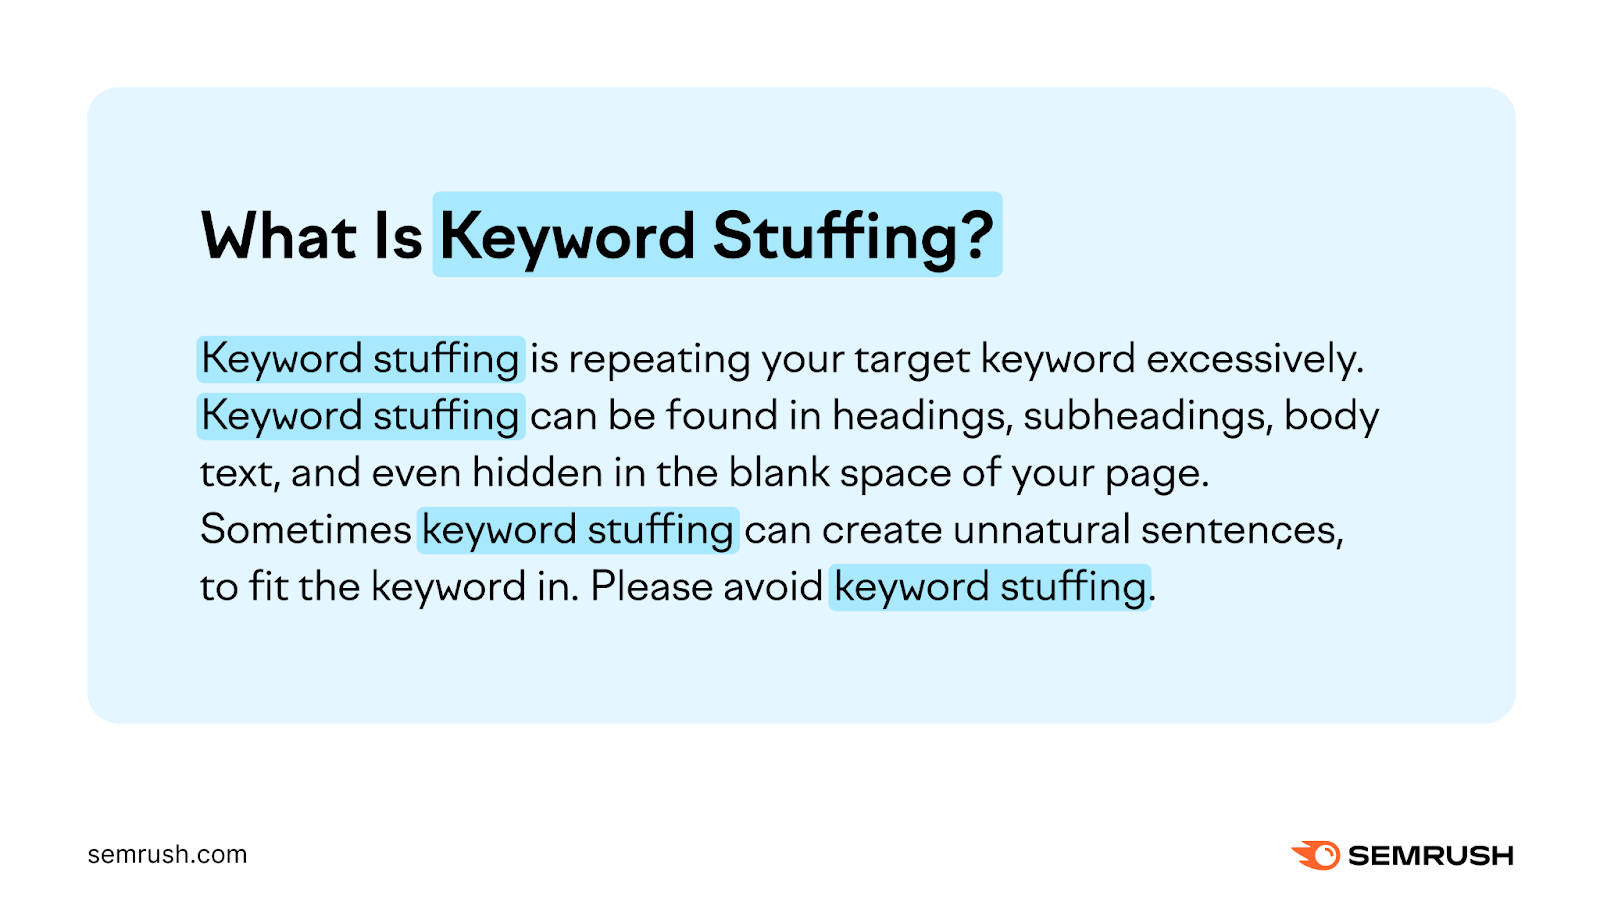 An example of keyword stuffing